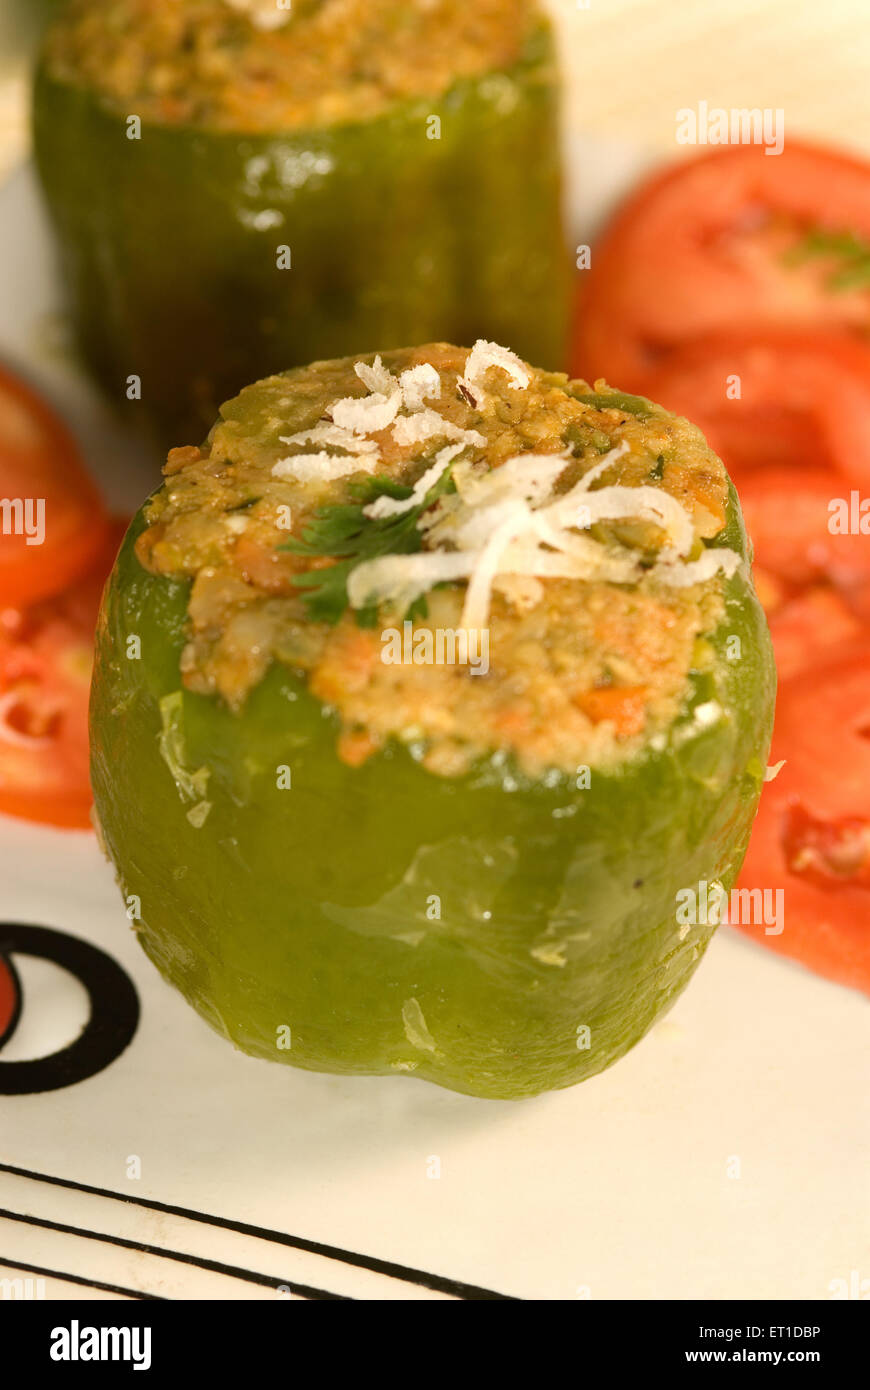 Stuff capsicum garnish with coriander leaves and grated coconut Stock Photo